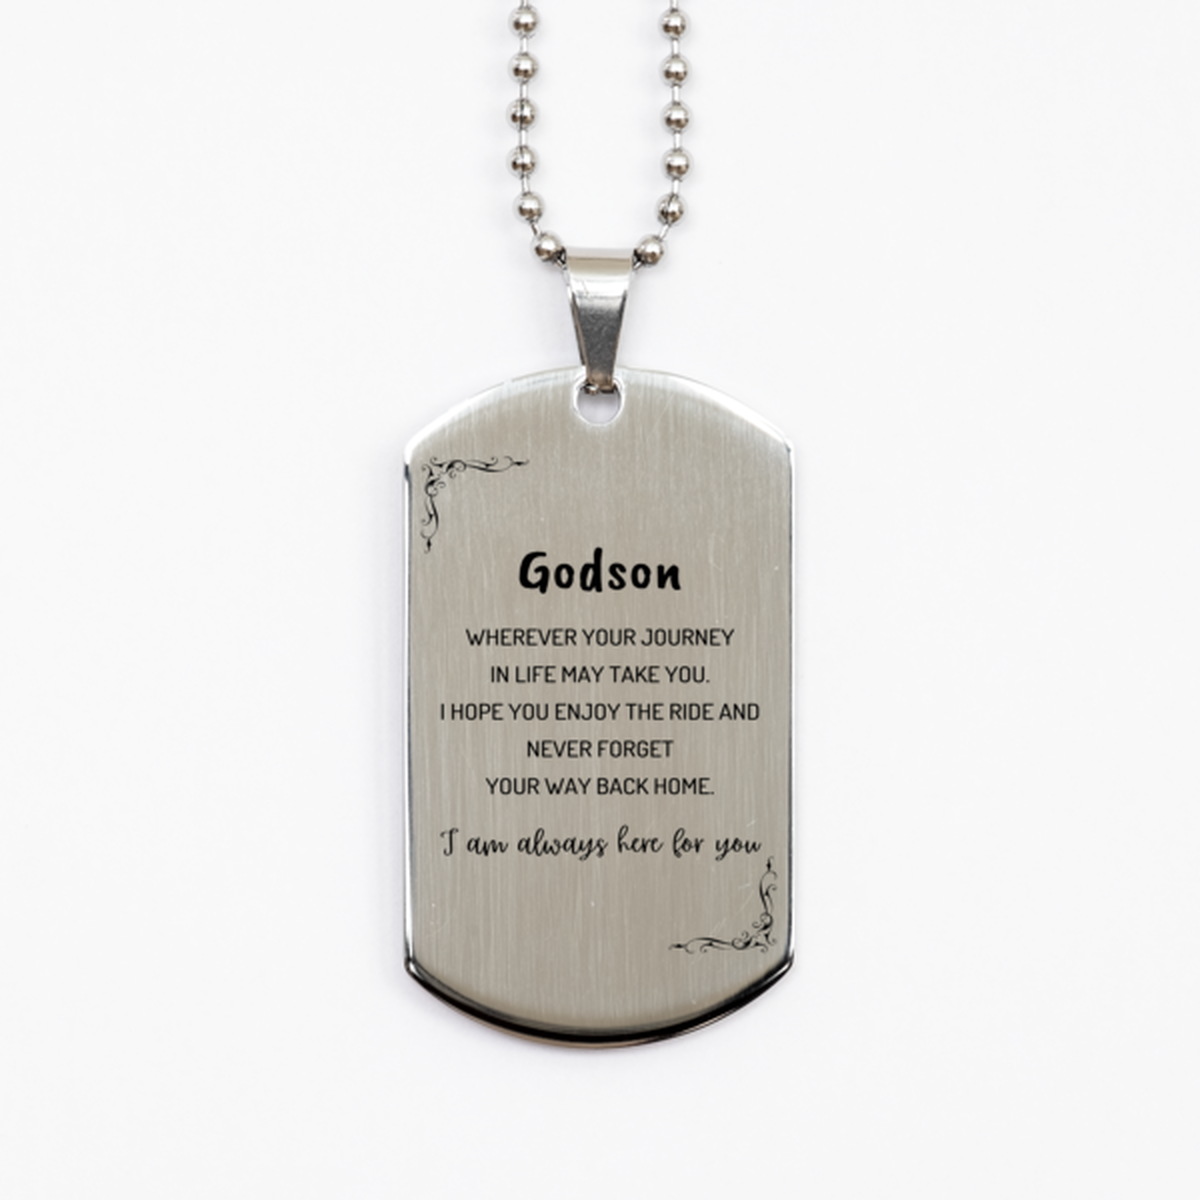 Godson wherever your journey in life may take you, I am always here for you Godson Silver Dog Tag, Awesome Christmas Gifts For Godson, Godson Birthday Gifts for Men Women Family Loved One